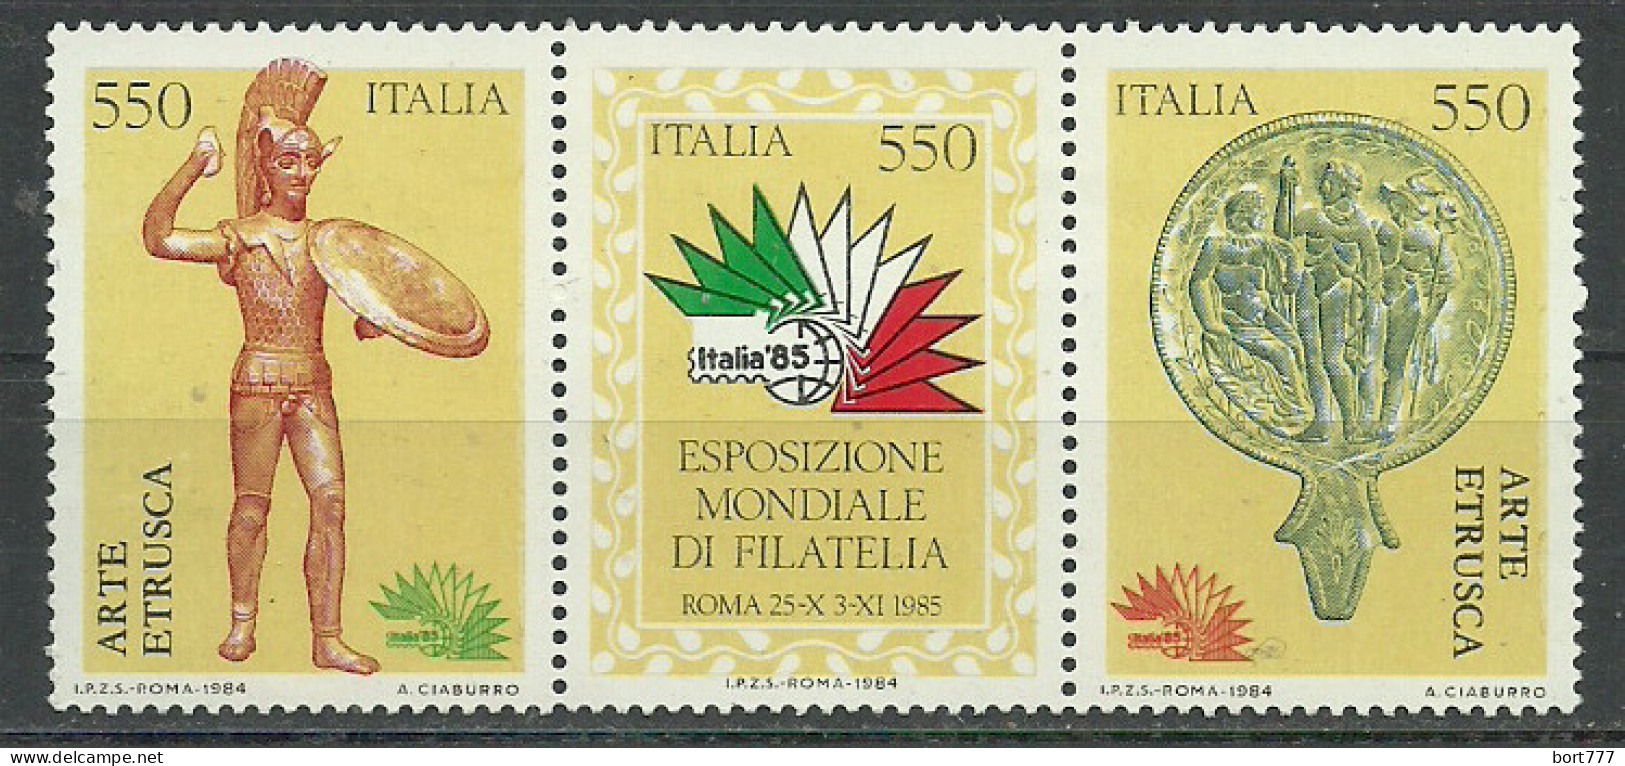 Italy 1984 Year, Mint MNH(**) Stamps , Michel # 1902-04 Dr. - 1981-90: Mint/hinged